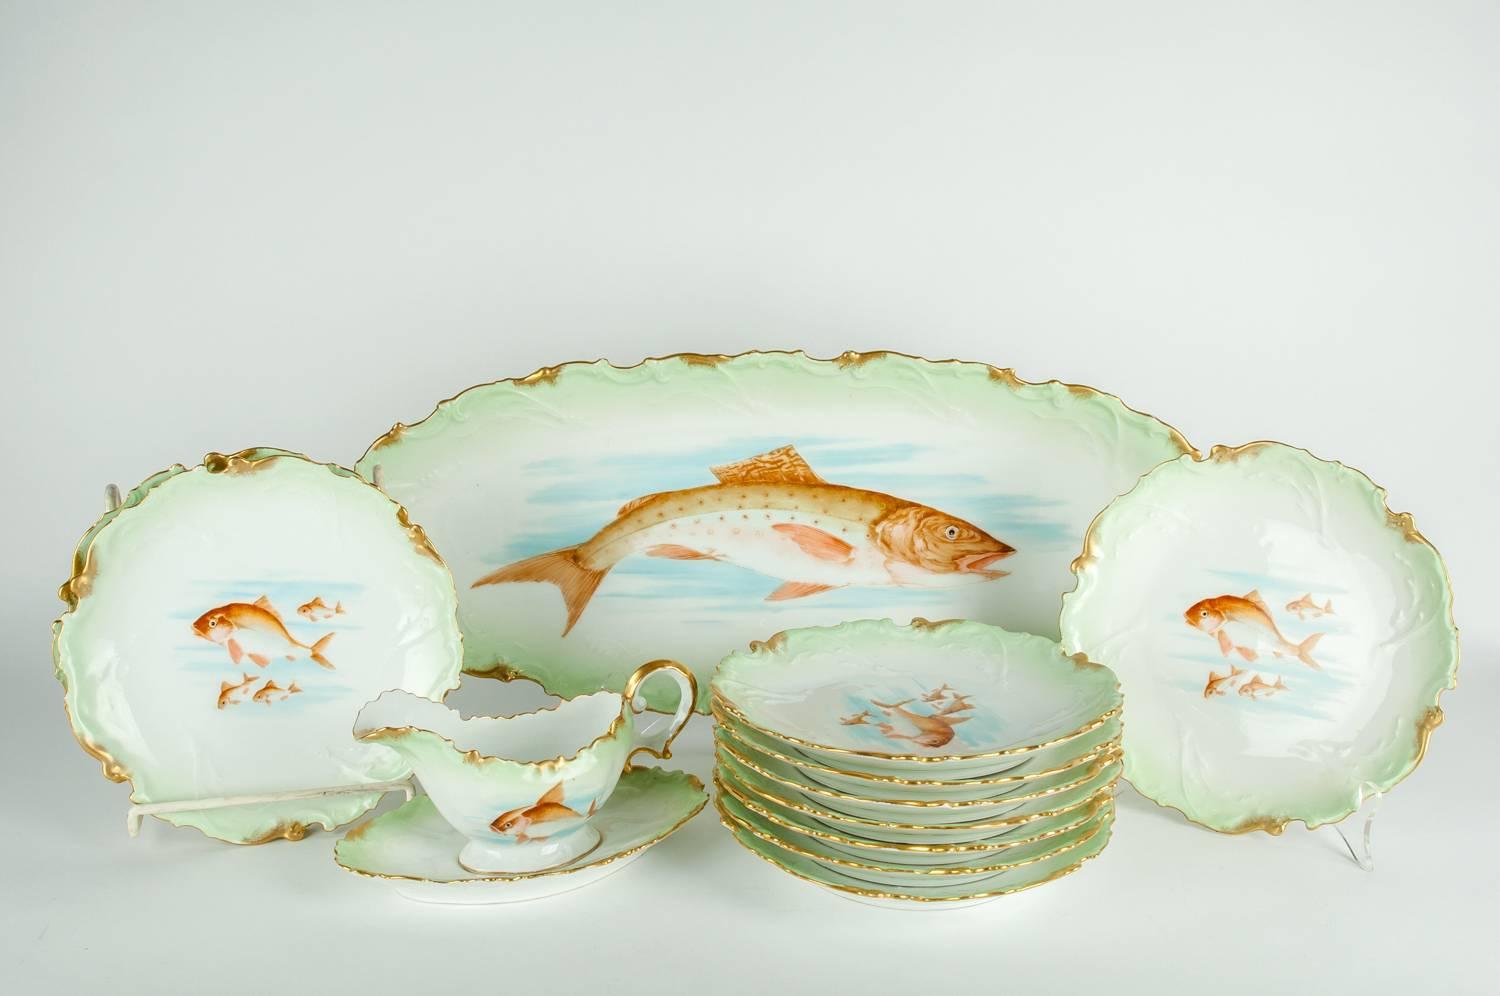 Antique Limoges porcelain with 22-karat gold Victorian era hand-painted 13 pieces fish serving set. Each piece is in excellent antique condition. The set include one large oval platter, ten plates and one sauce boat with under plate. The platter is